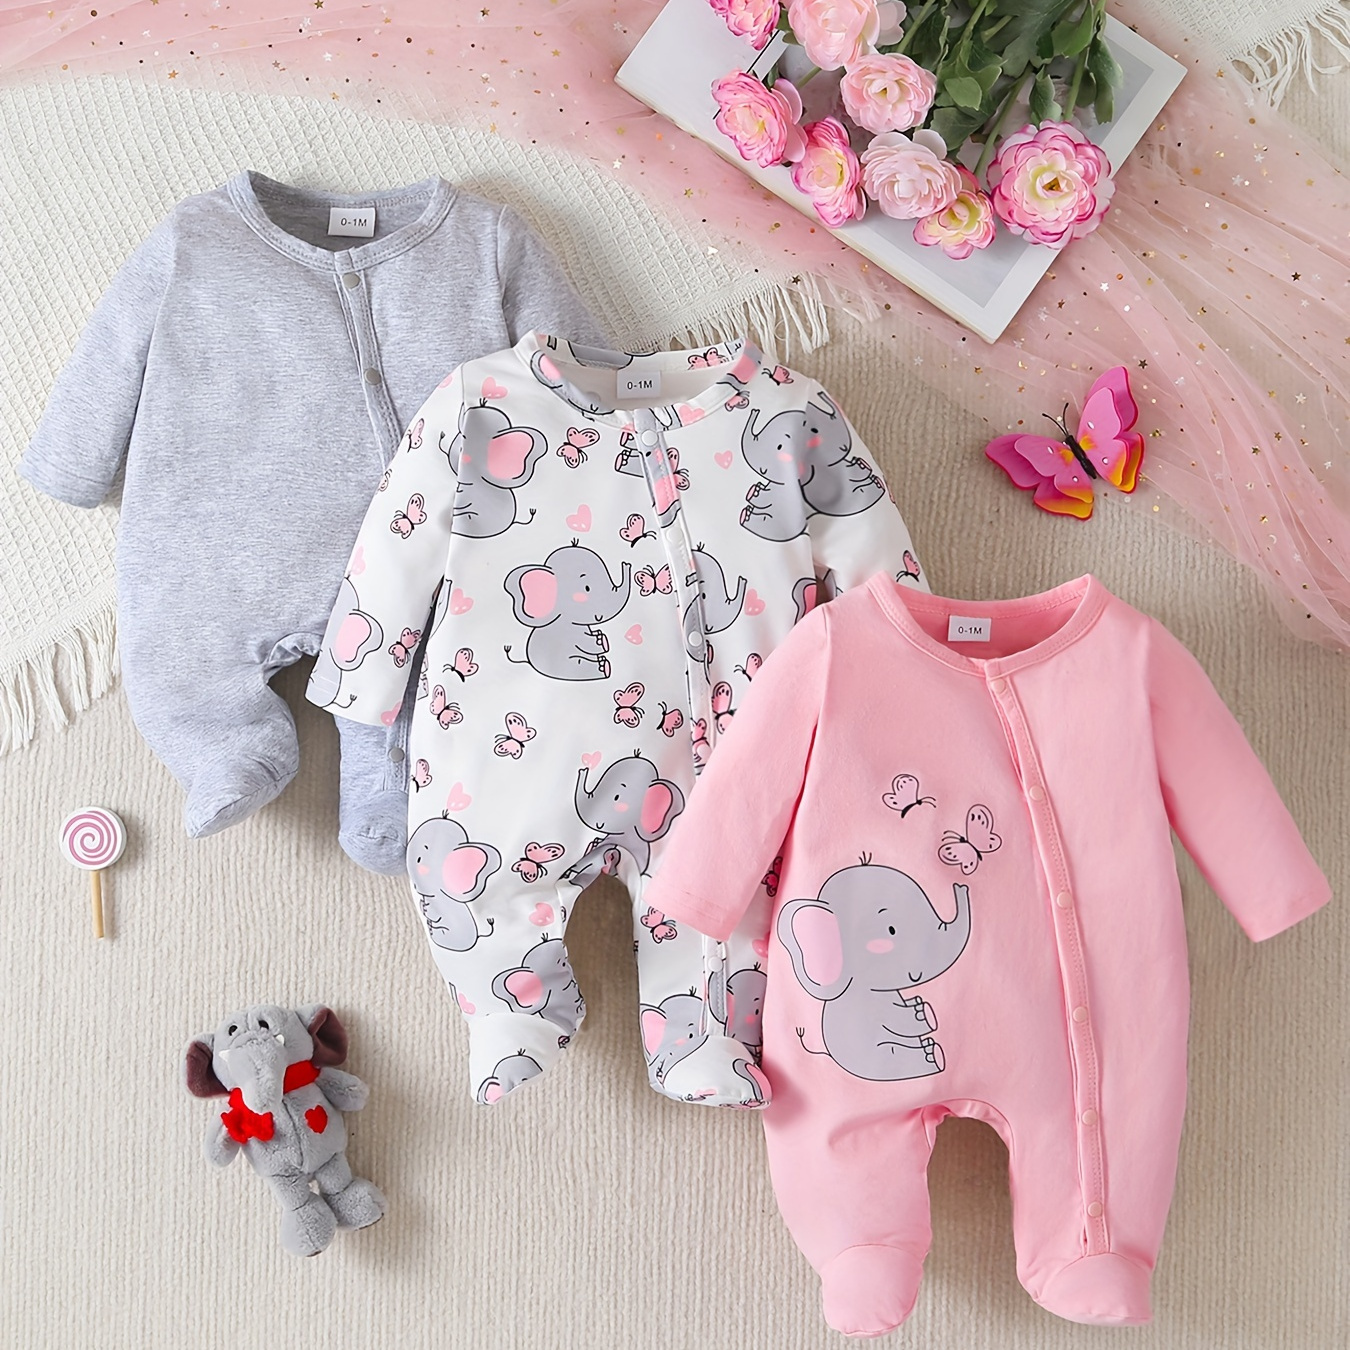 

3pcs Newborn Baby's Elephant Print Zipper Long Sleeve Footie, Toddler & Infant Girl's Comfy Footed Romper Set For Spring Fall